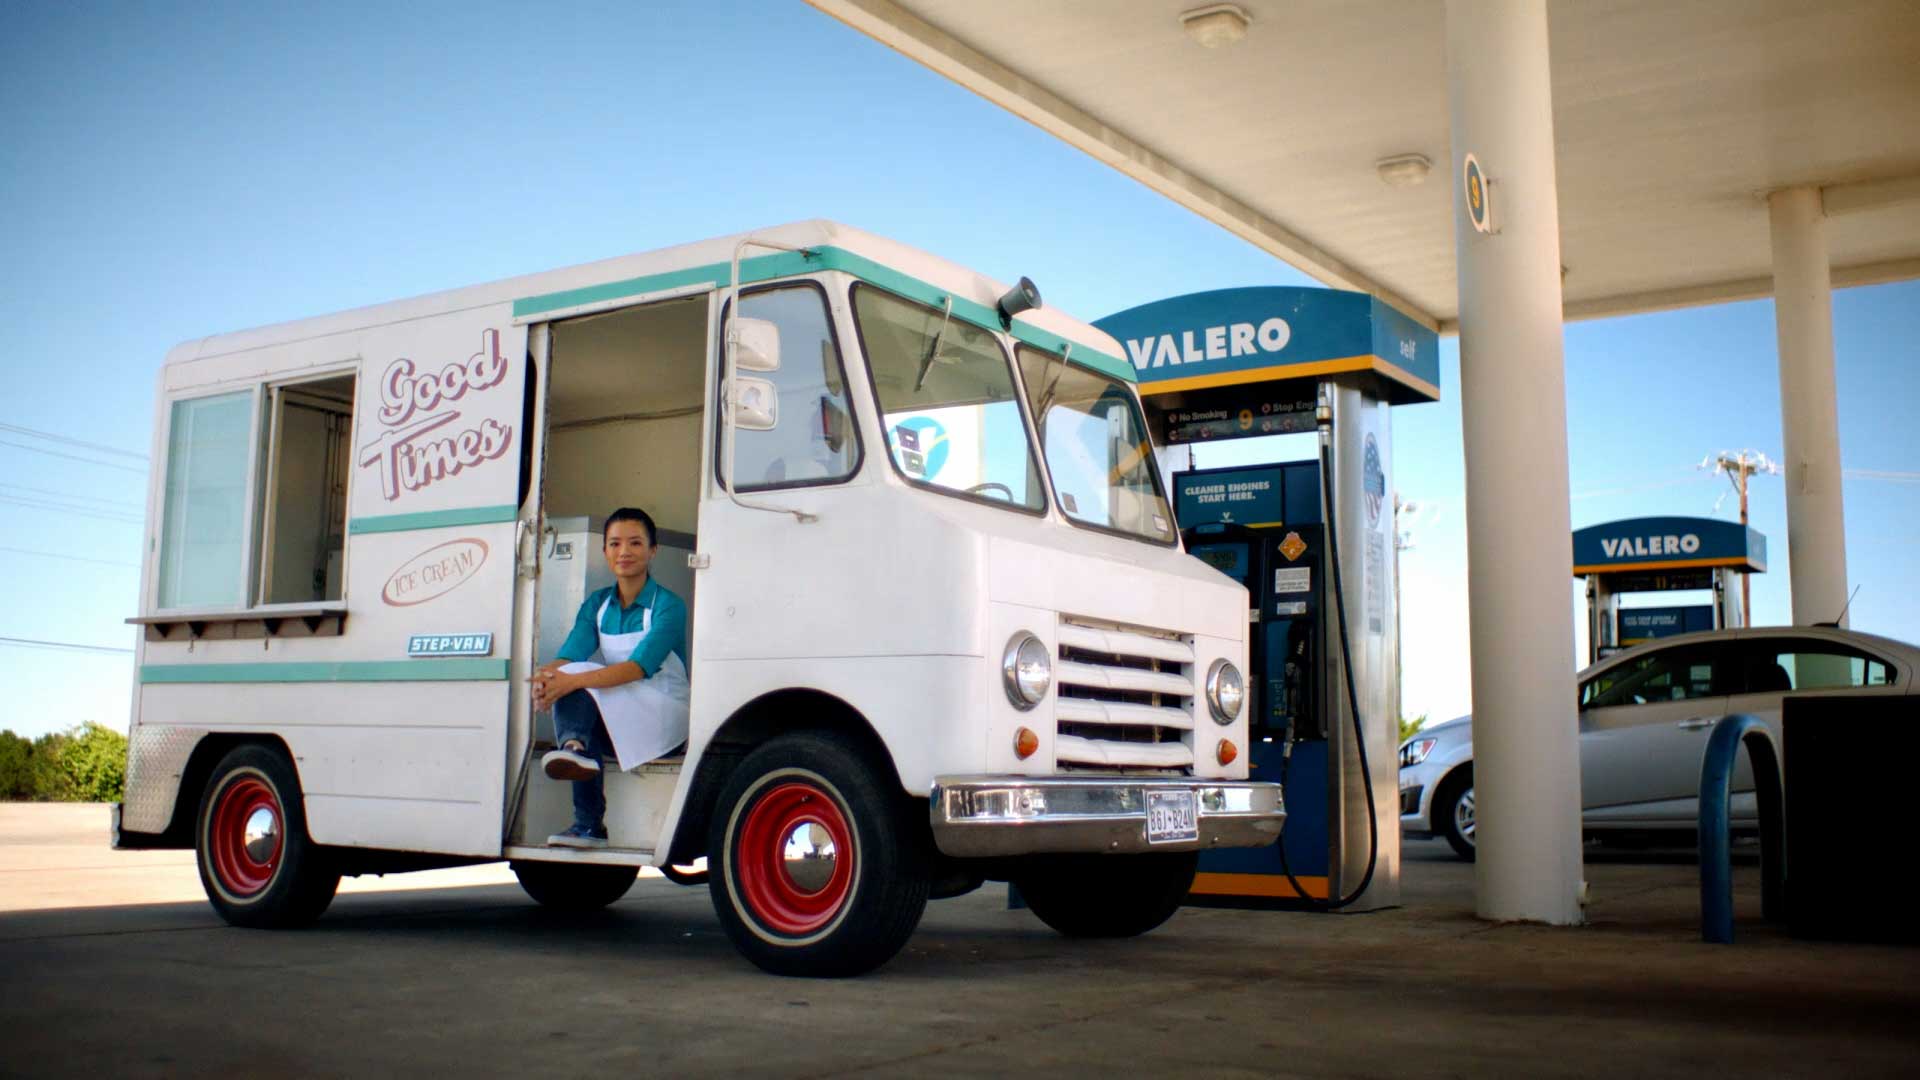 Valero — “This is What We Use”